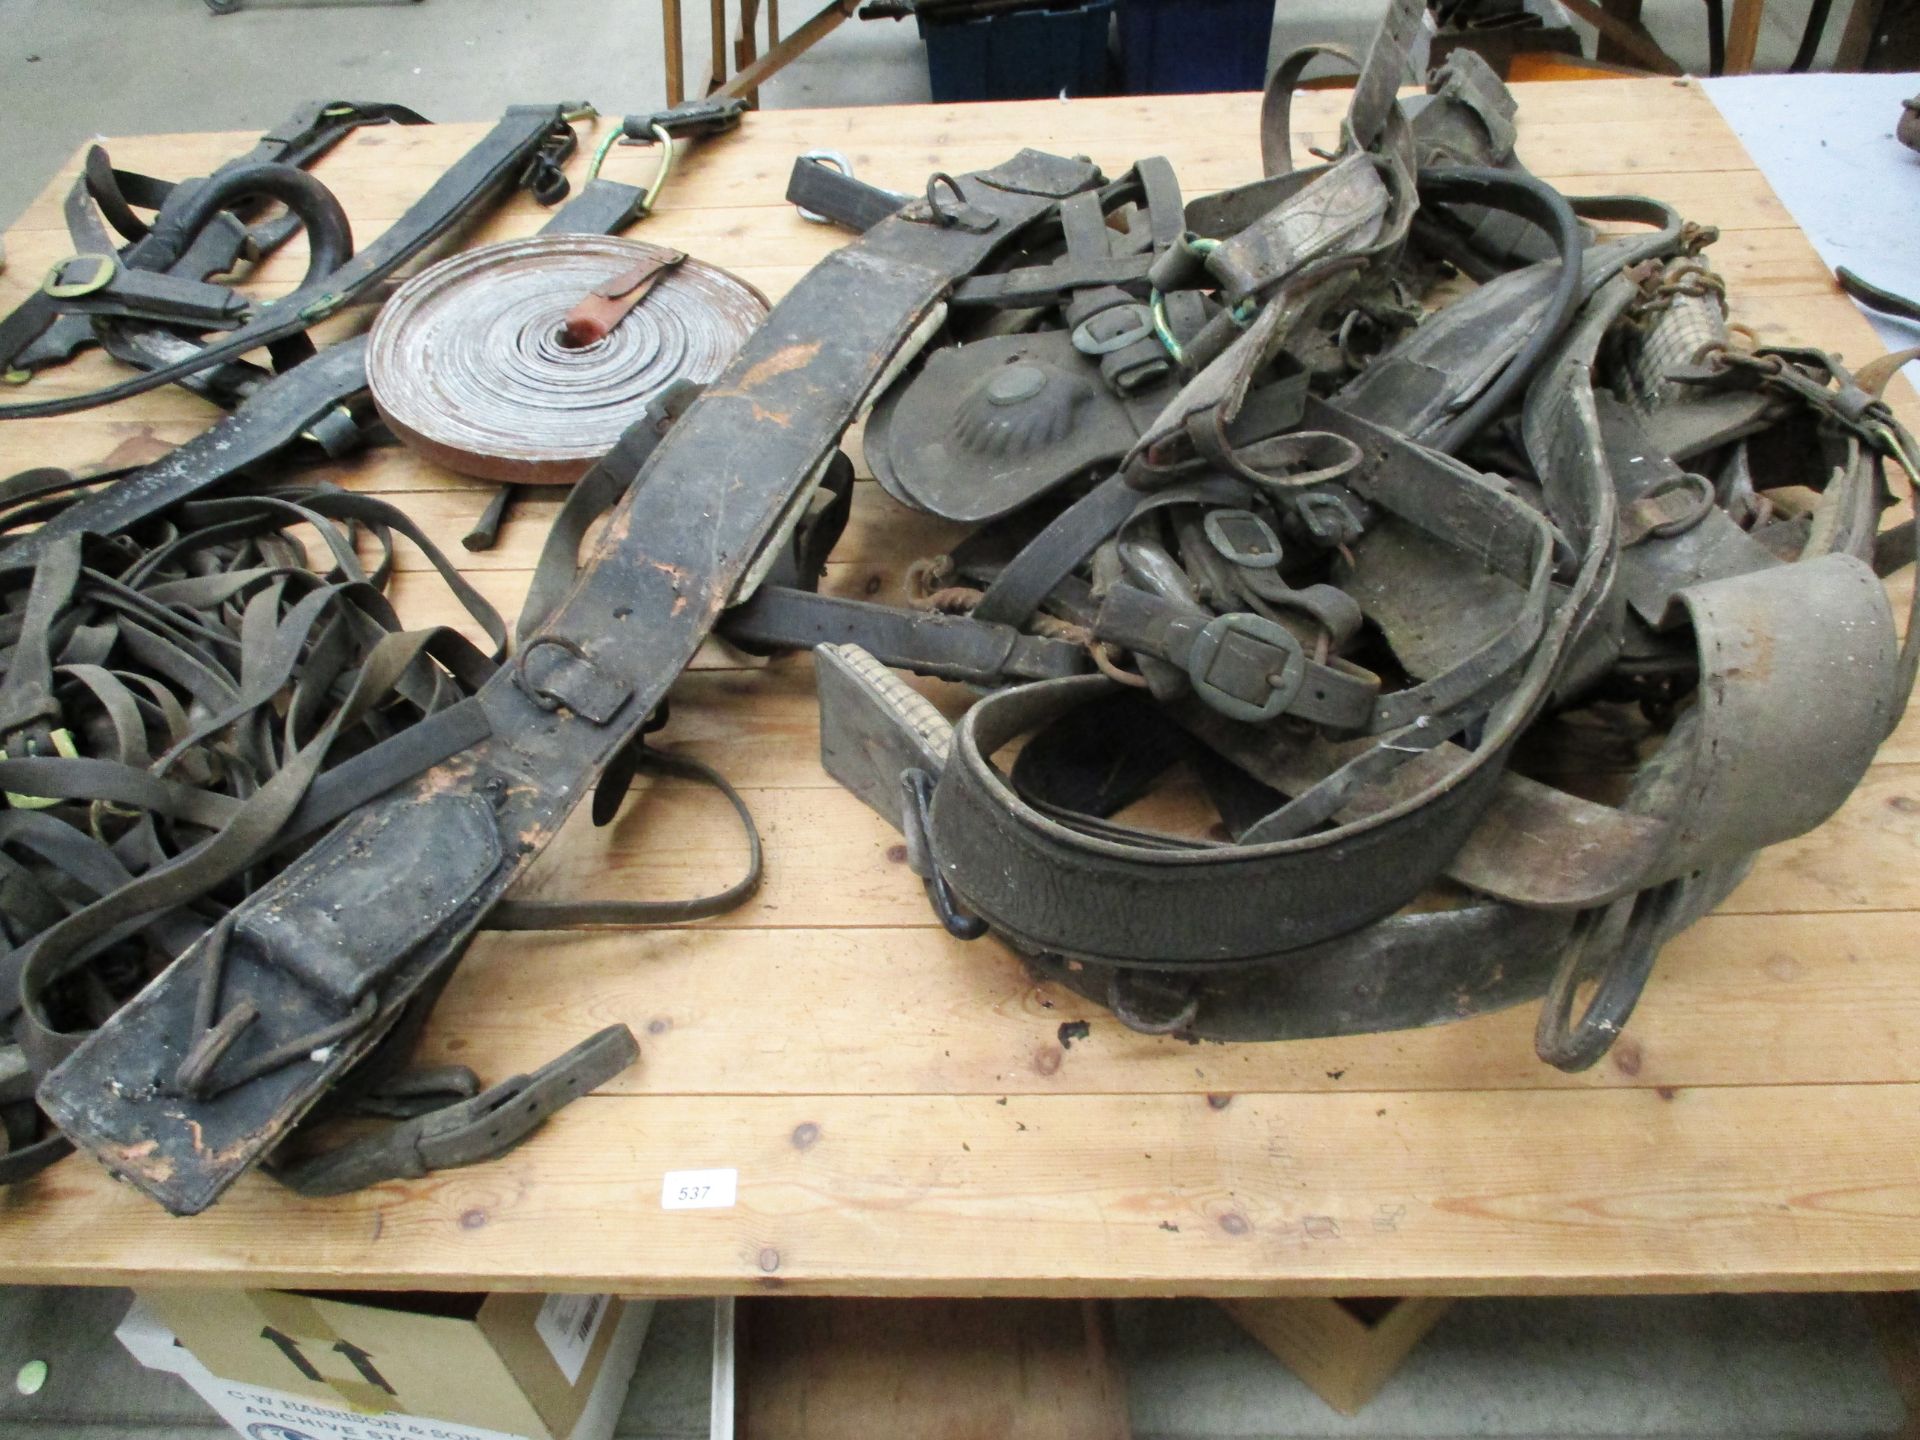 Contents to table top - harness, blinkers etc.